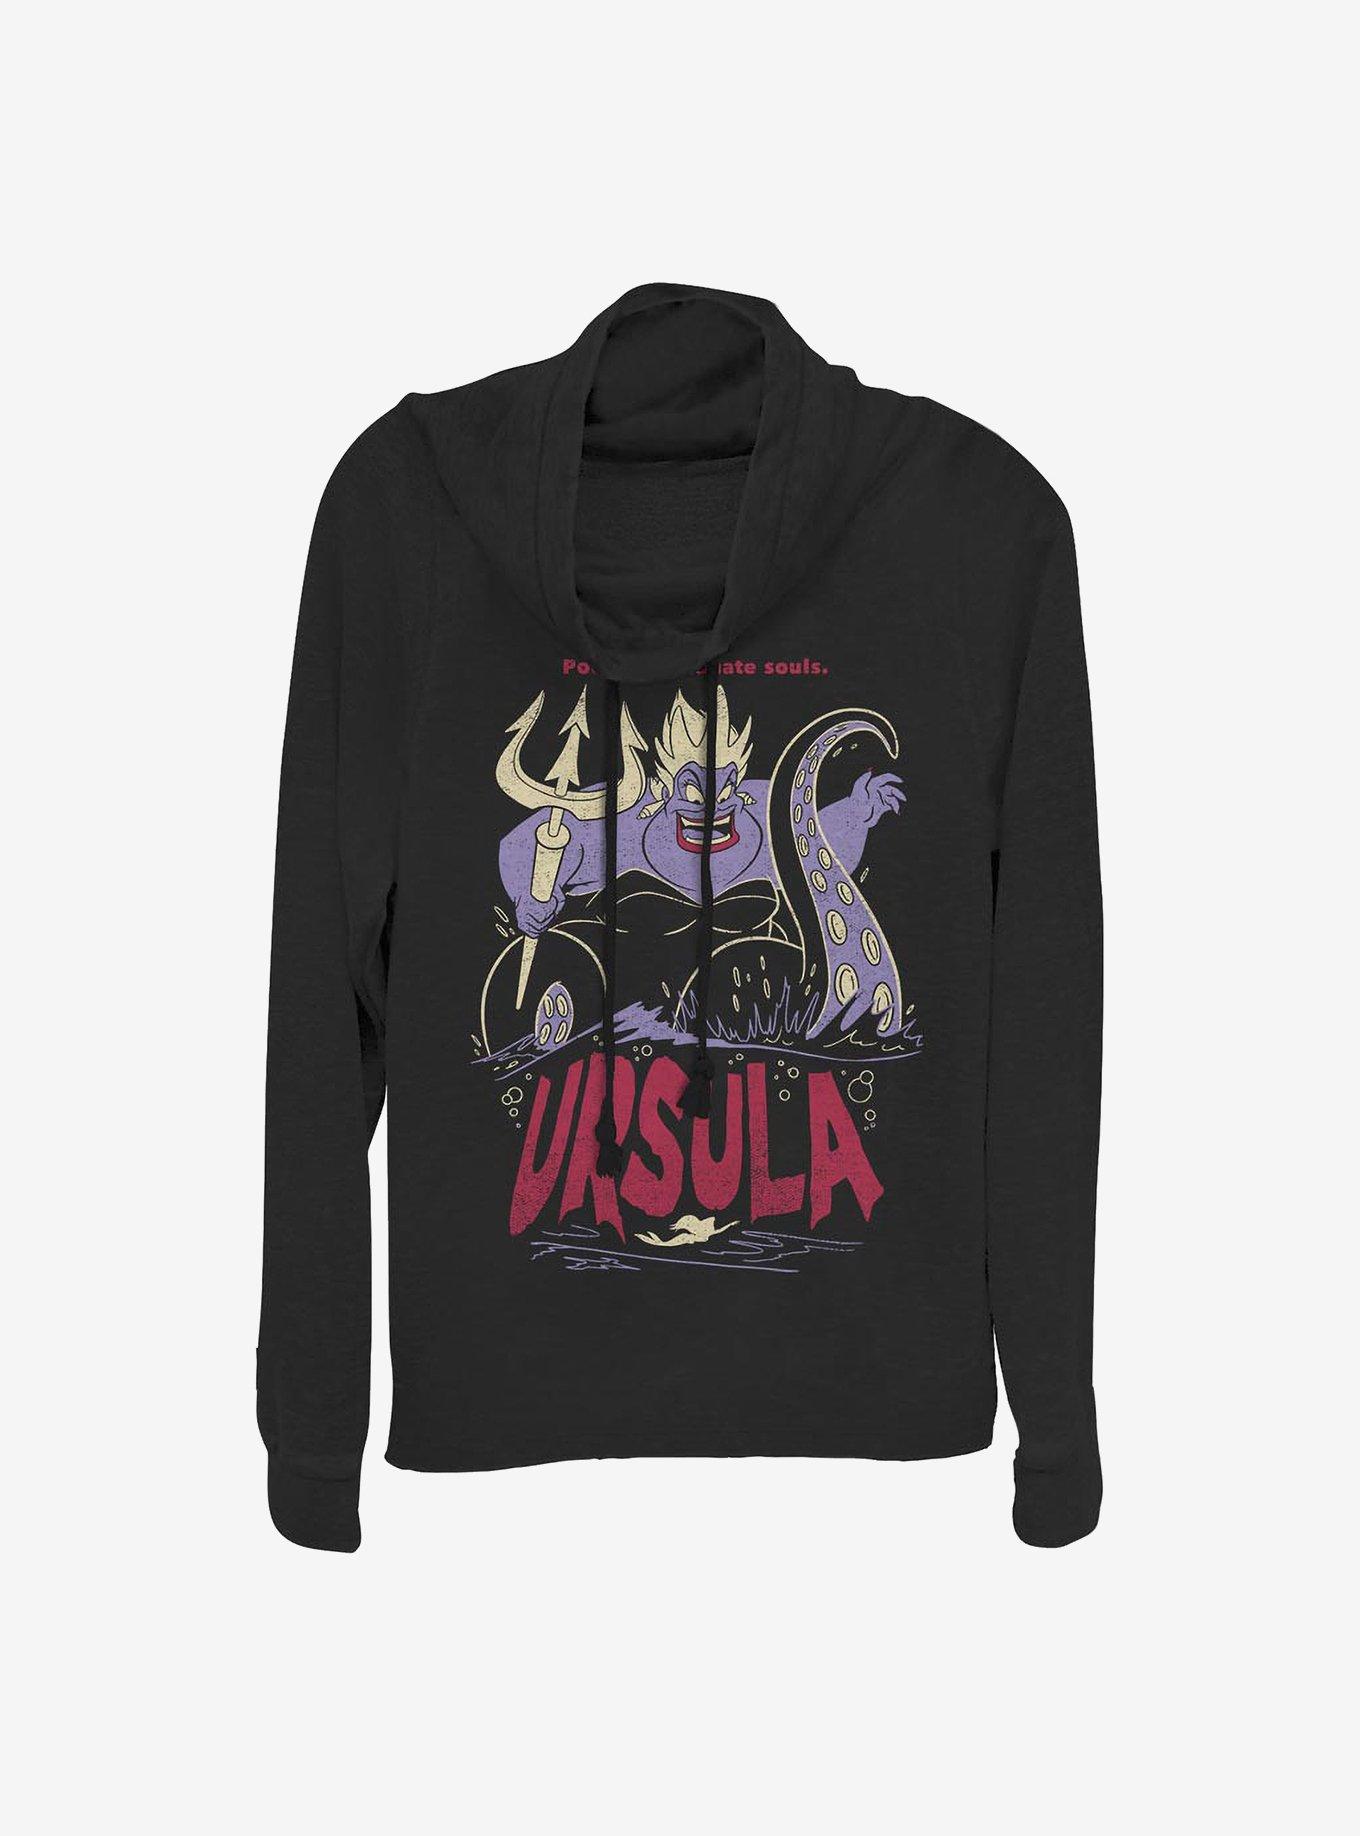 Disney The Little Mermaid Ursula The Sea Witch Cowlneck Long-Sleeve Girls Top, BLACK, hi-res